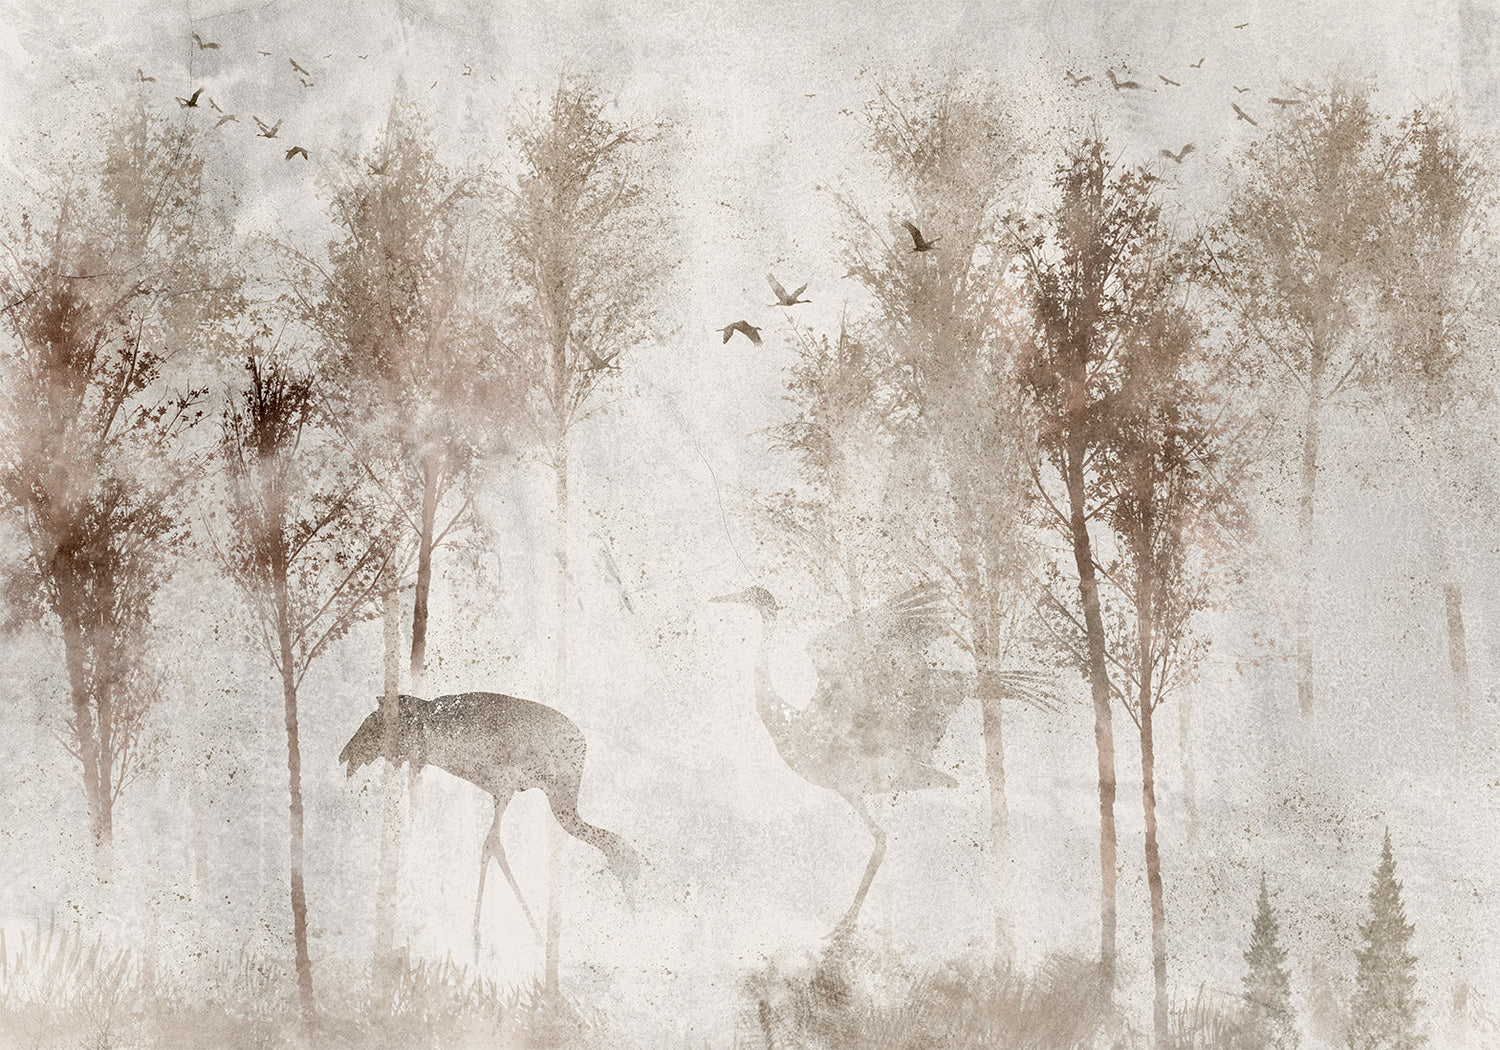 Peel & Stick Landscape Wall Mural - Birds In Foggy Forest - Removable Wallpaper